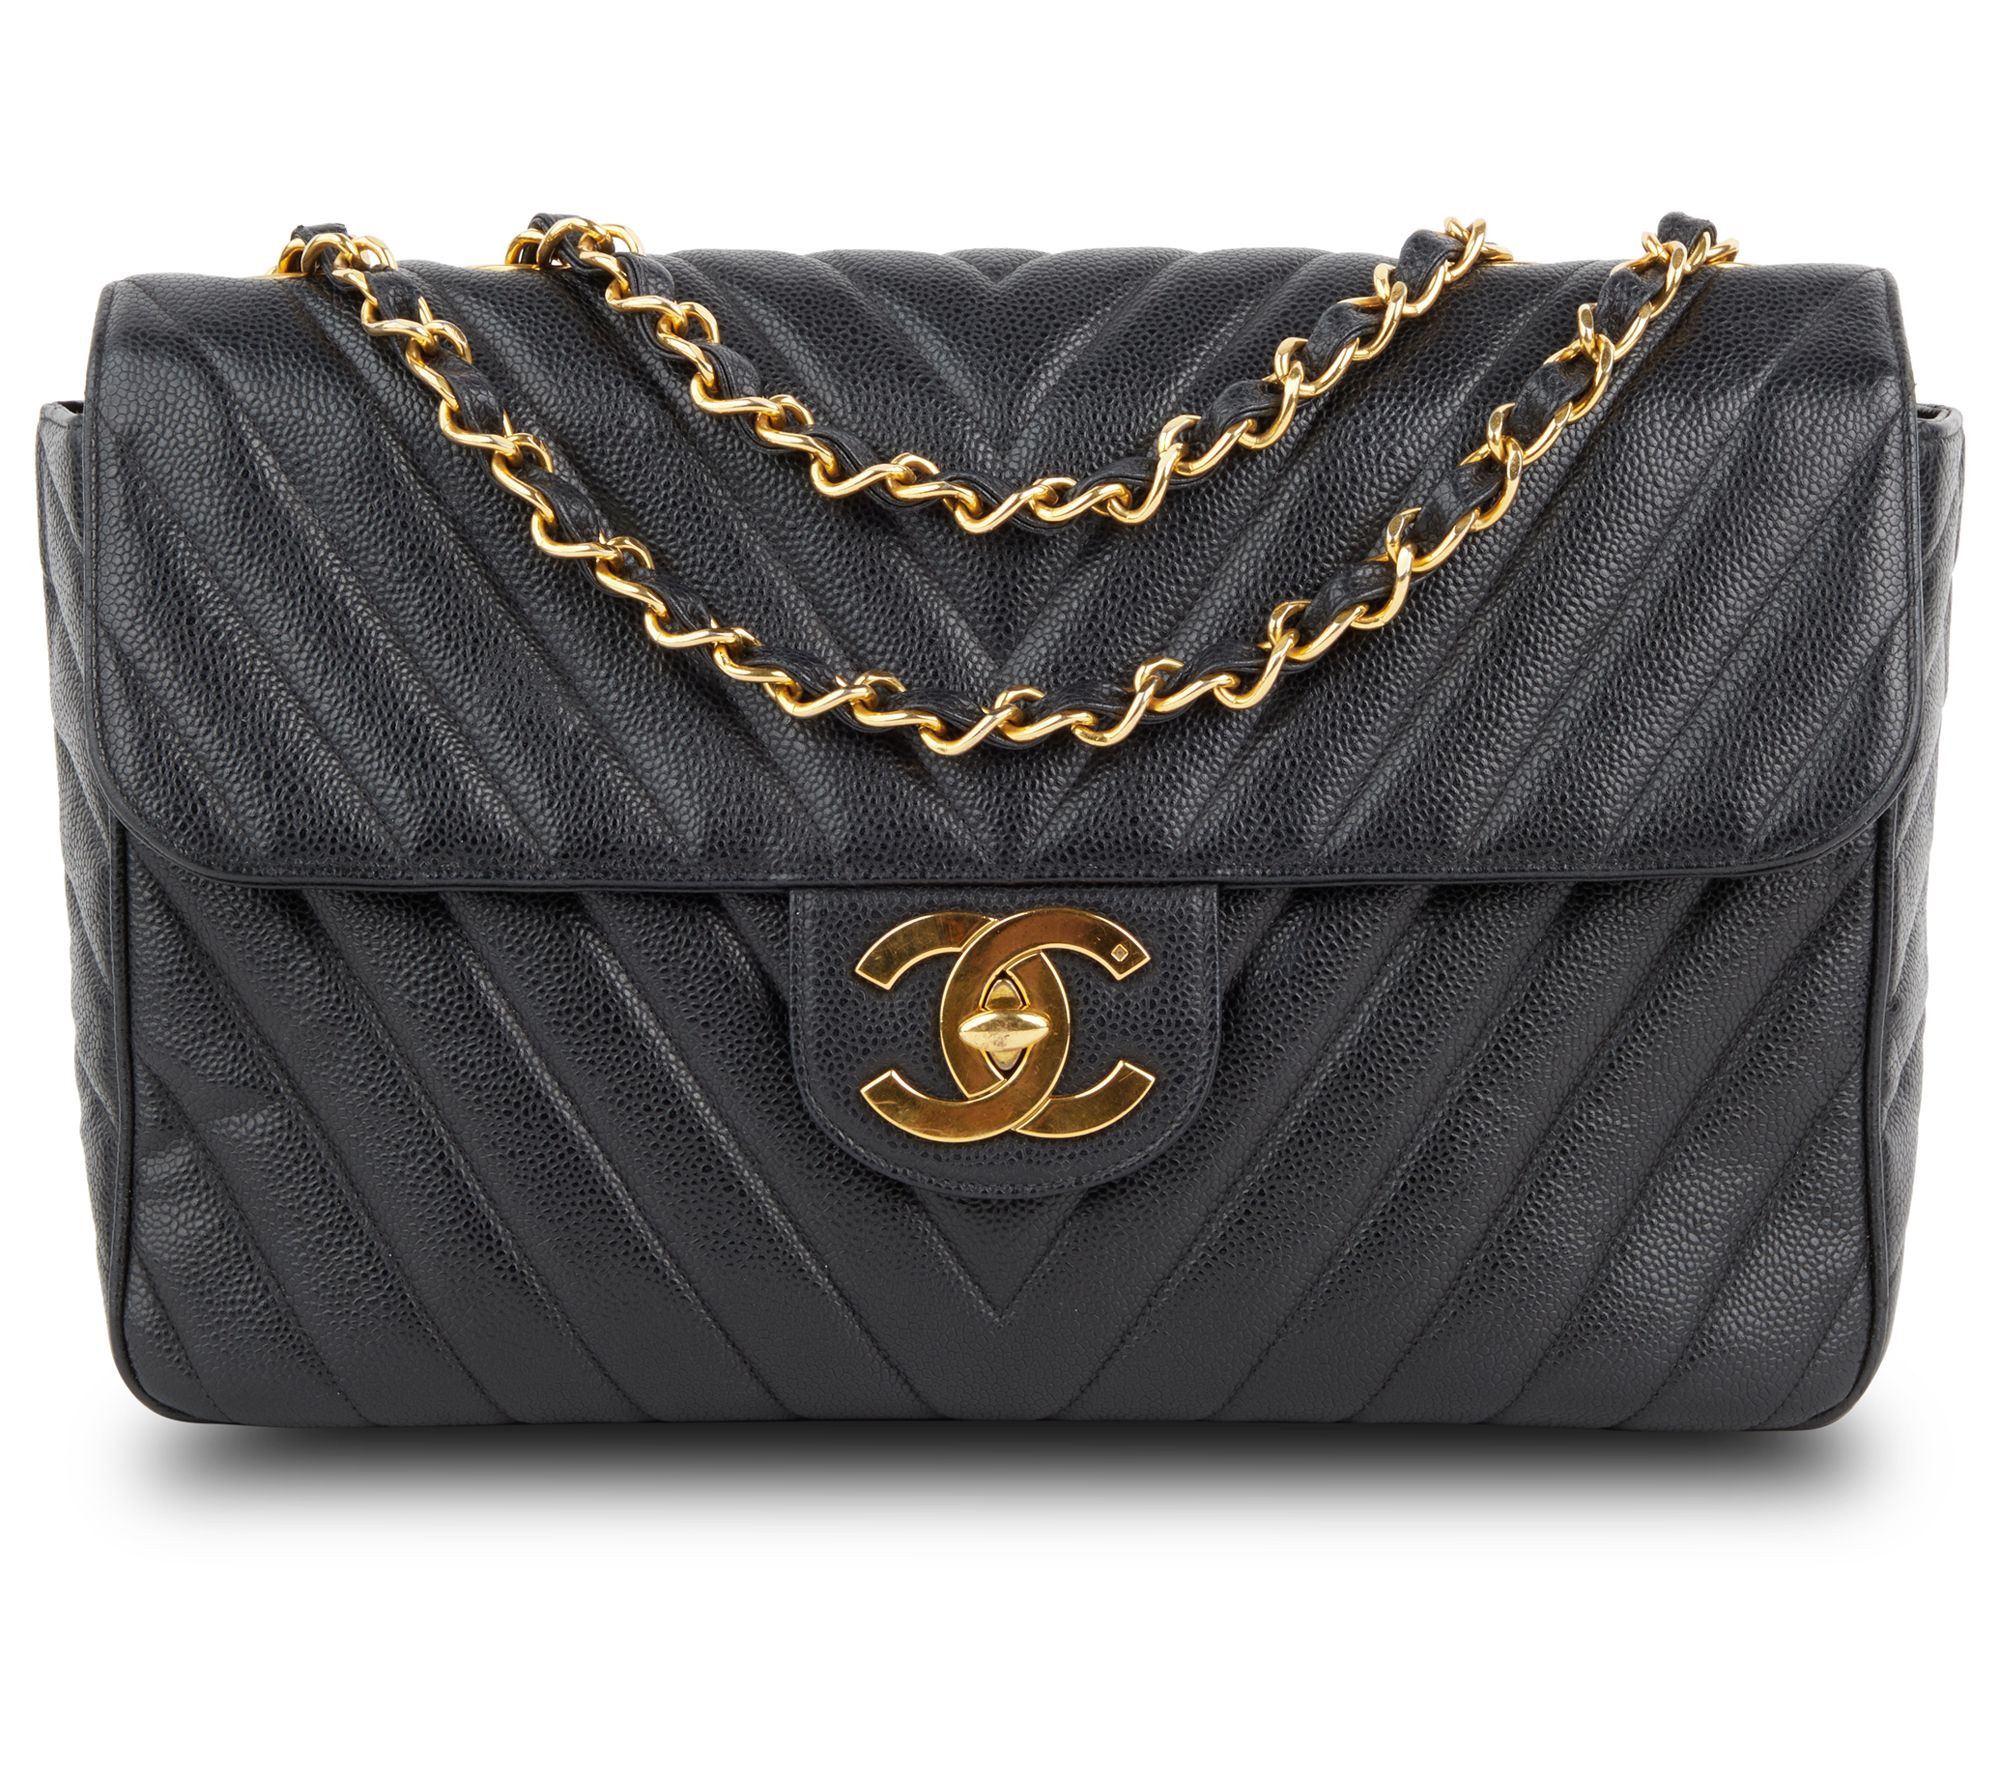 Chanel Pre-owned Quilted Luggage Handbag - Black